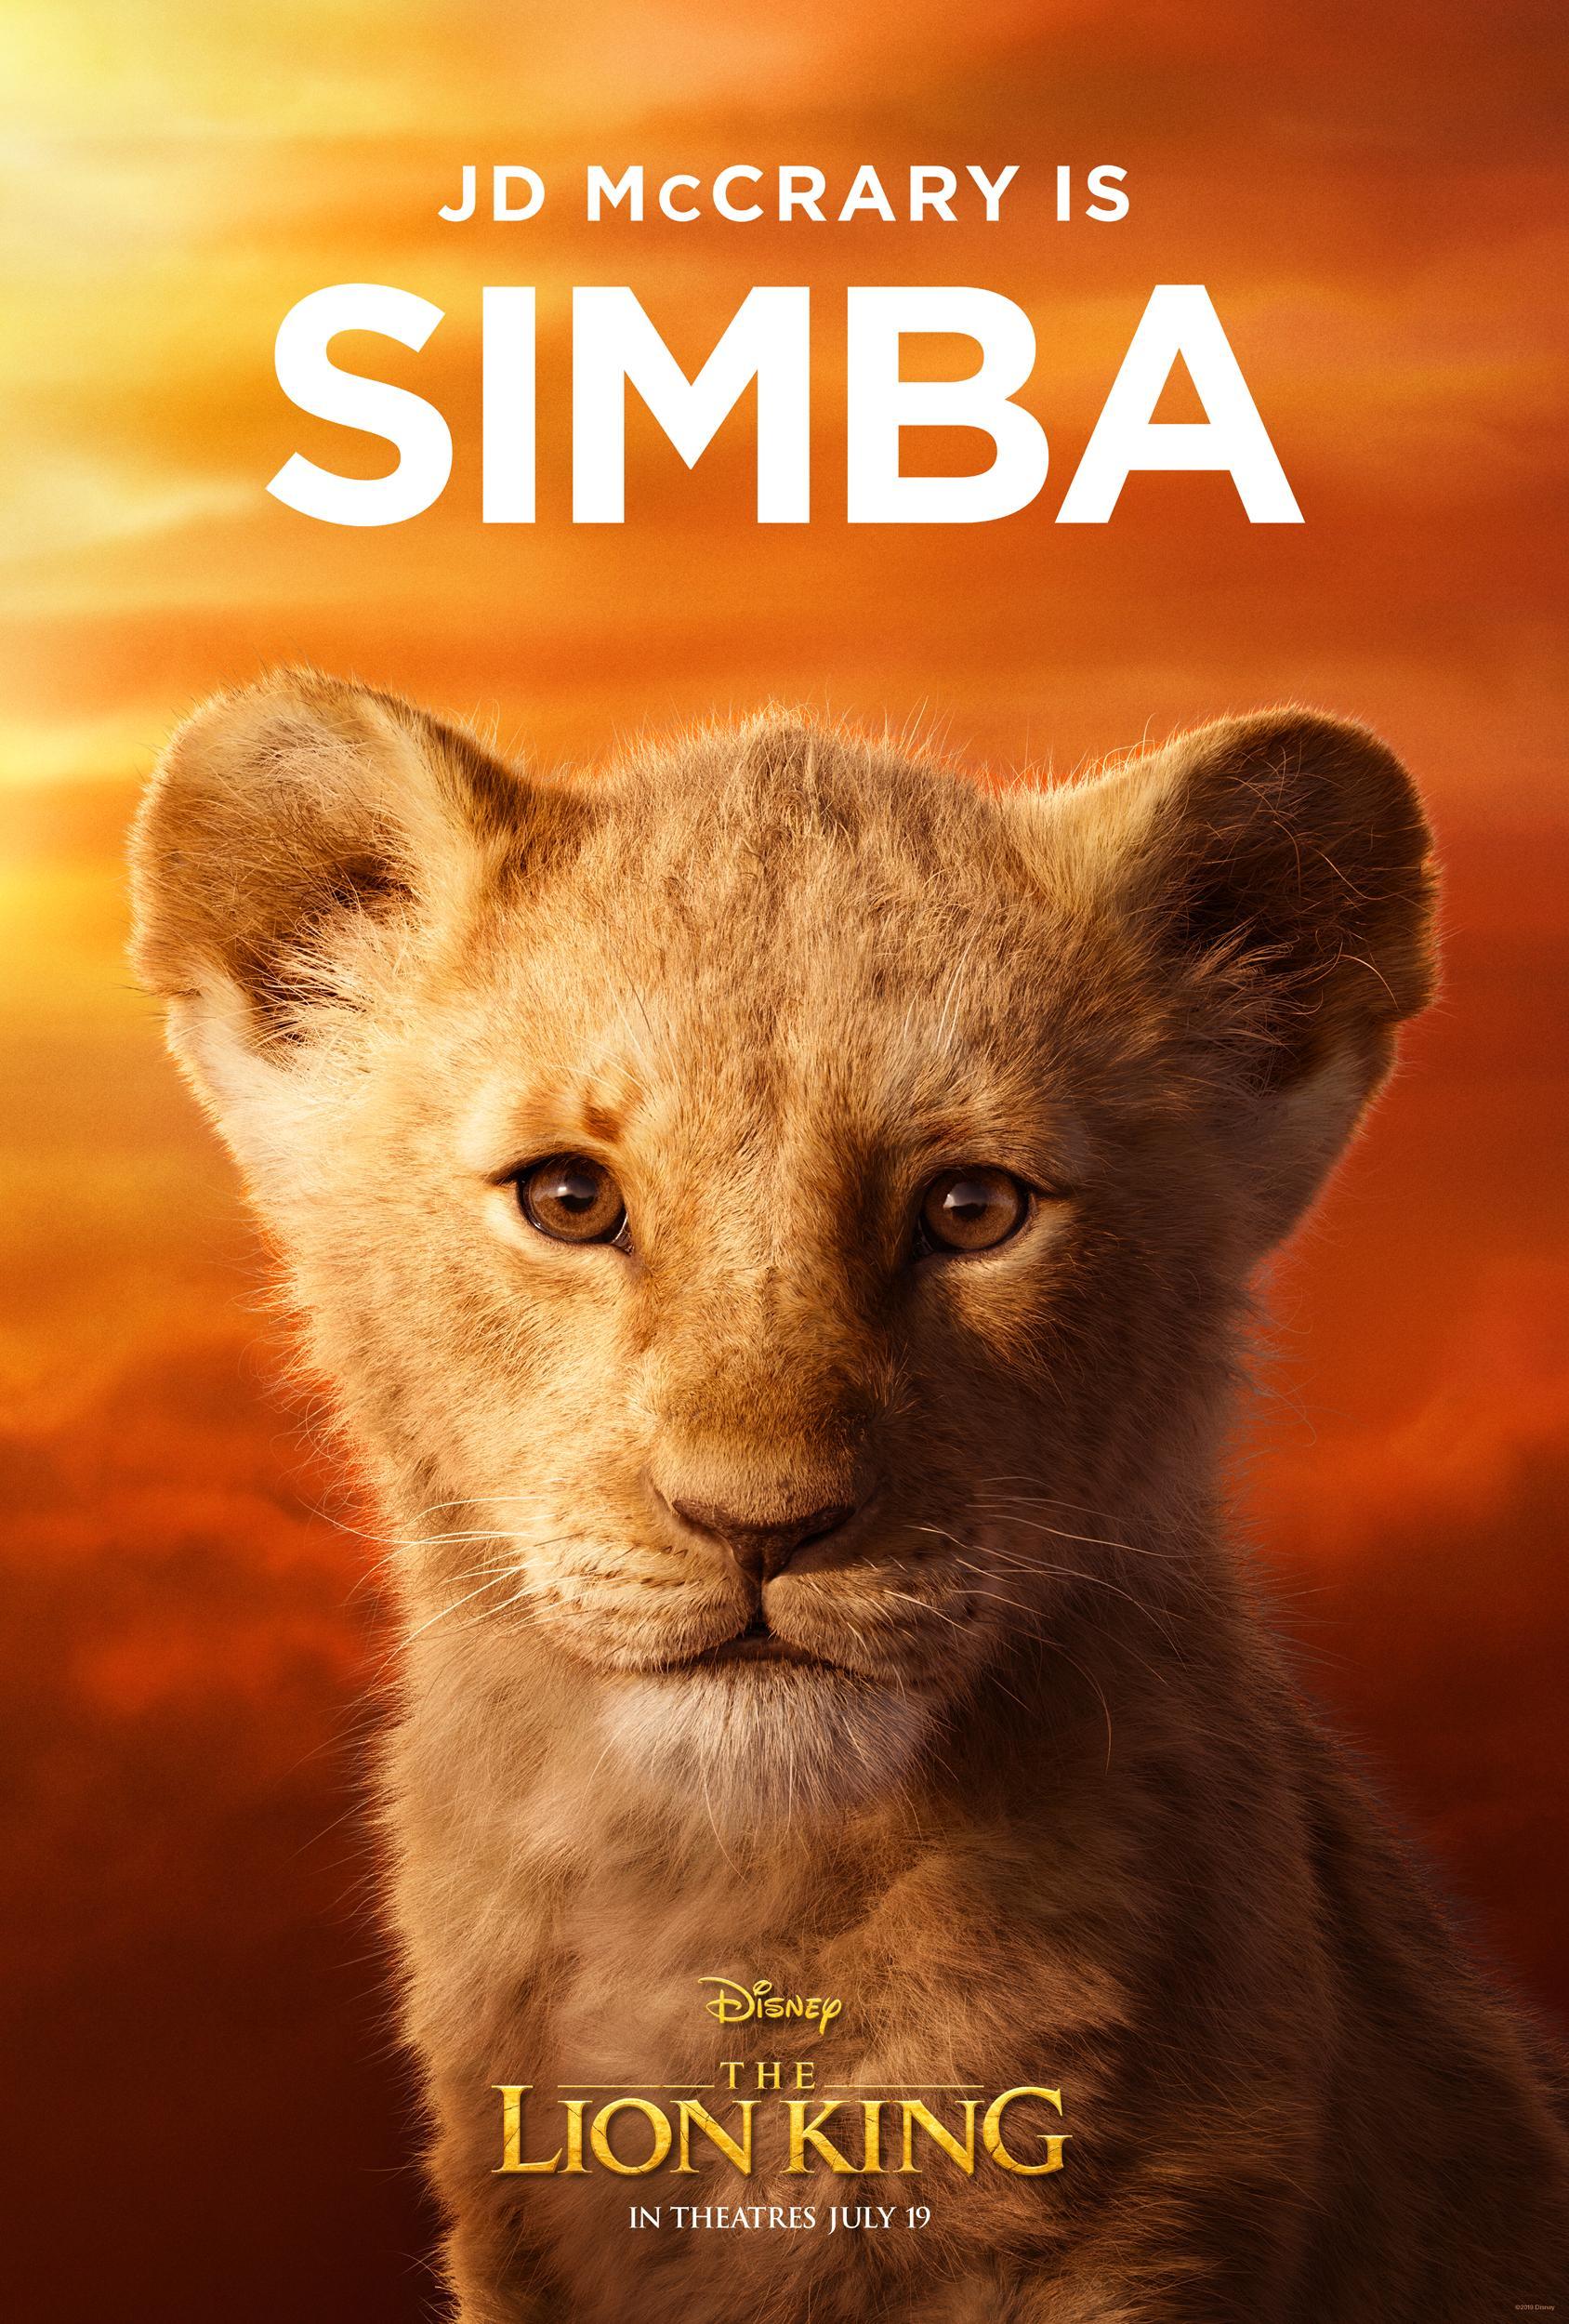 The Lion King Character Posters Reveal the Full Cast